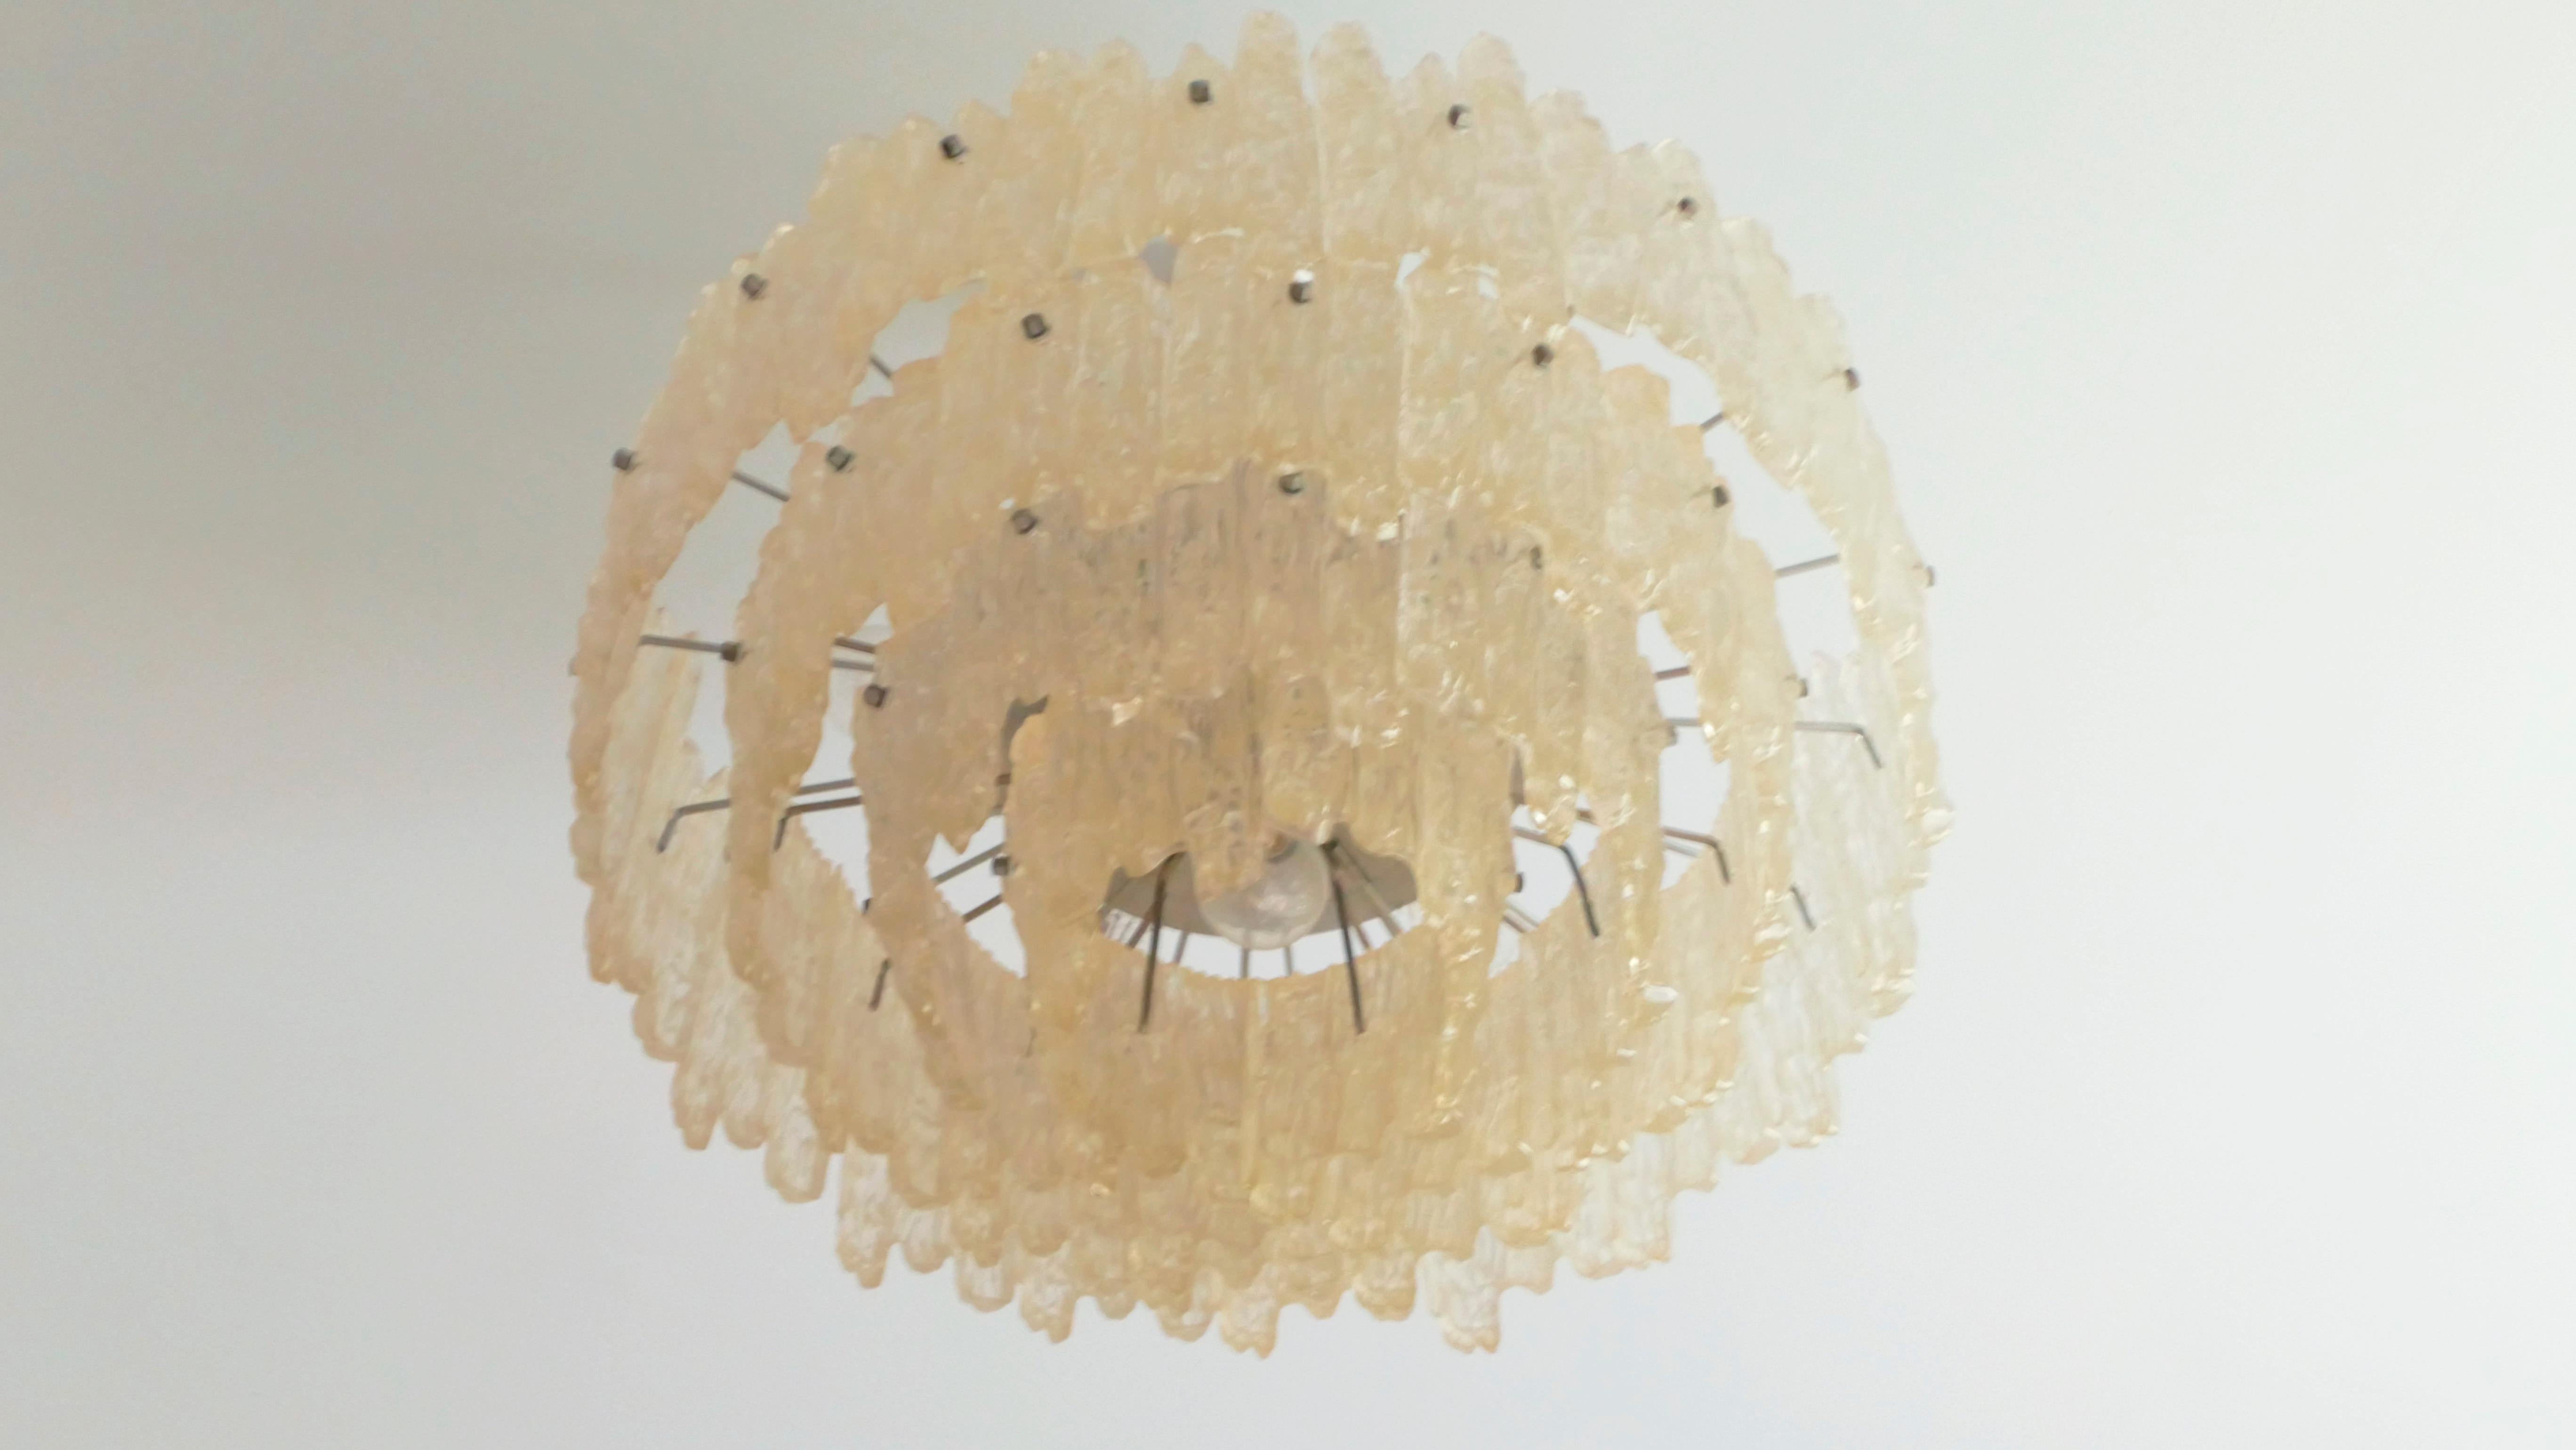 An immediately arresting piece, this vintage Kinkeldey chandelier is crafted from brushed metal and Lucite, formed to resemble haunting melting icicles. Its warm, yellow light is refracted through the icicles that feels cozy and imaginative. This